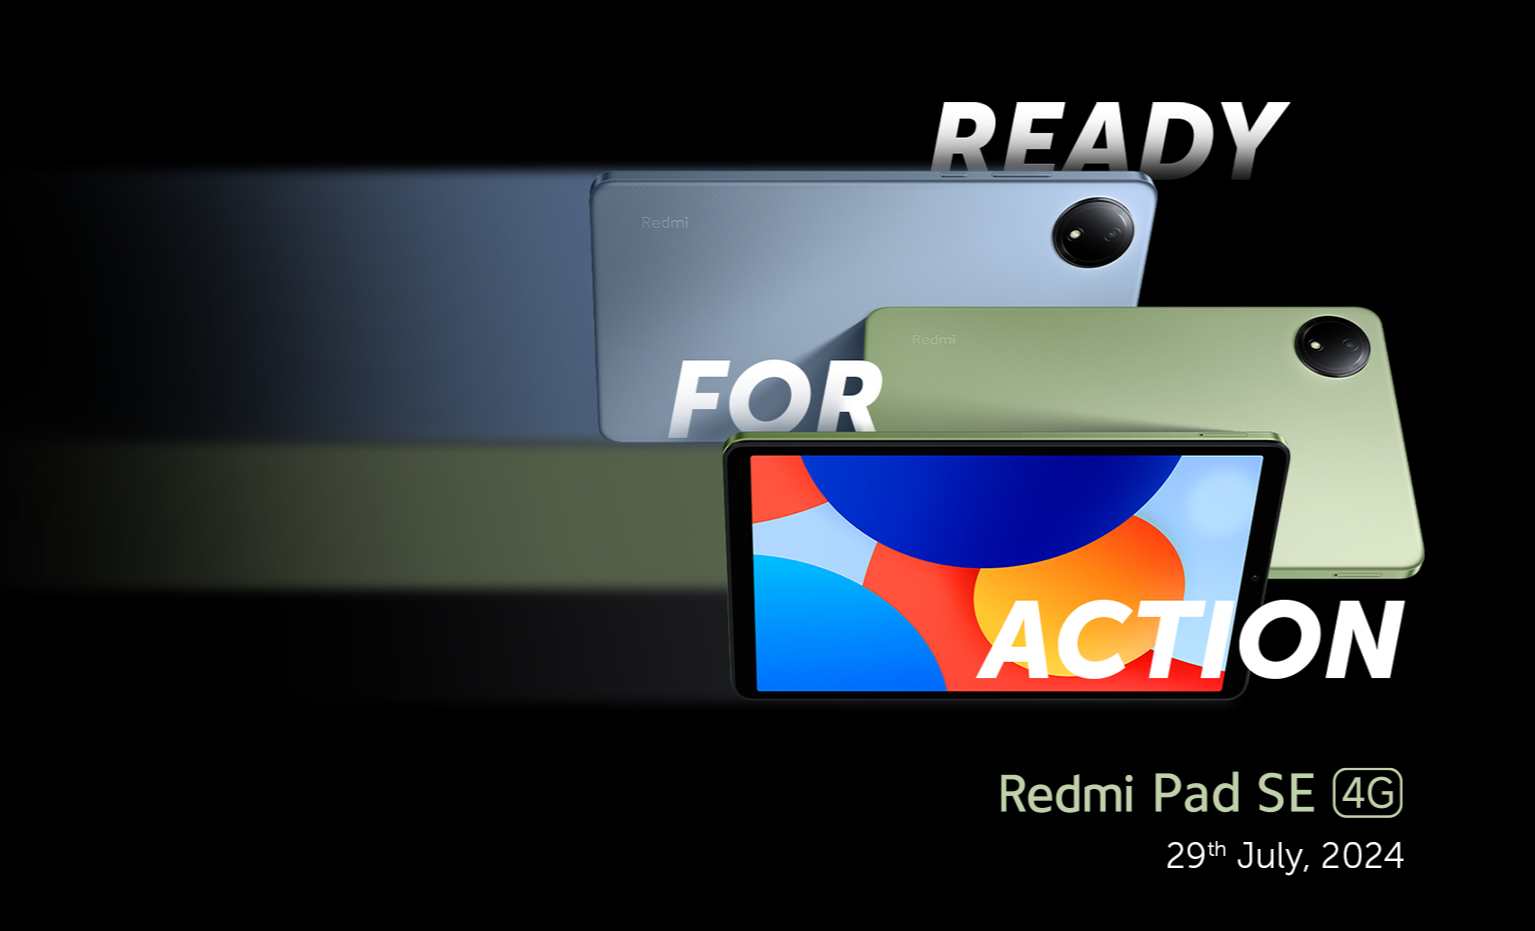 It's official: Xiaomi will unveil the Redmi Pad SE 4G tablet on 29 July